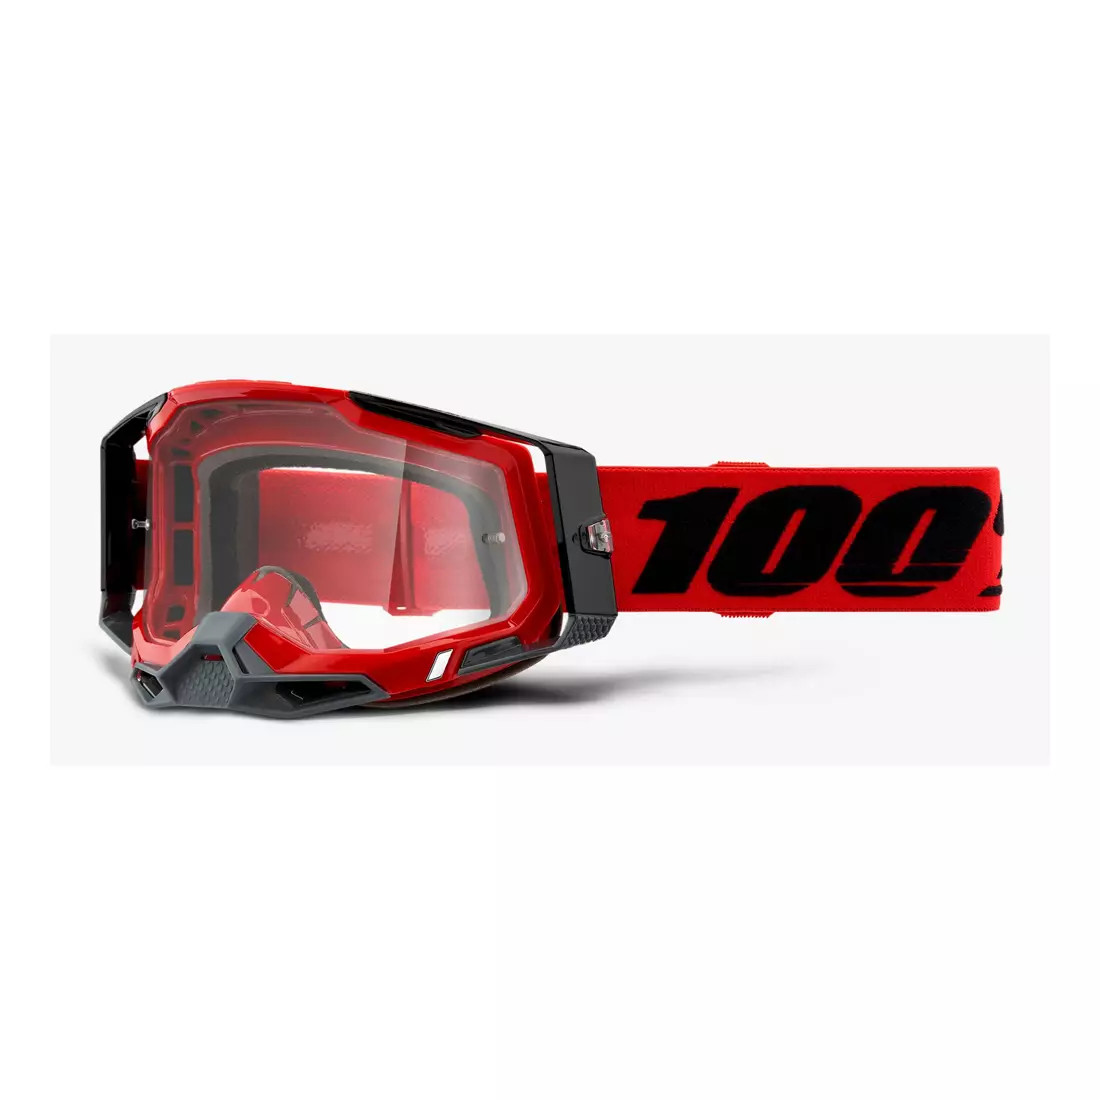 100% bicycle goggles RACECRAFT 2 (red mirror Anti-Fog glass, LT 38%+/-5% + transparent Anti-Fog glass, LT 88%-92% + 10 skidding) attack red STO-50121-251-03